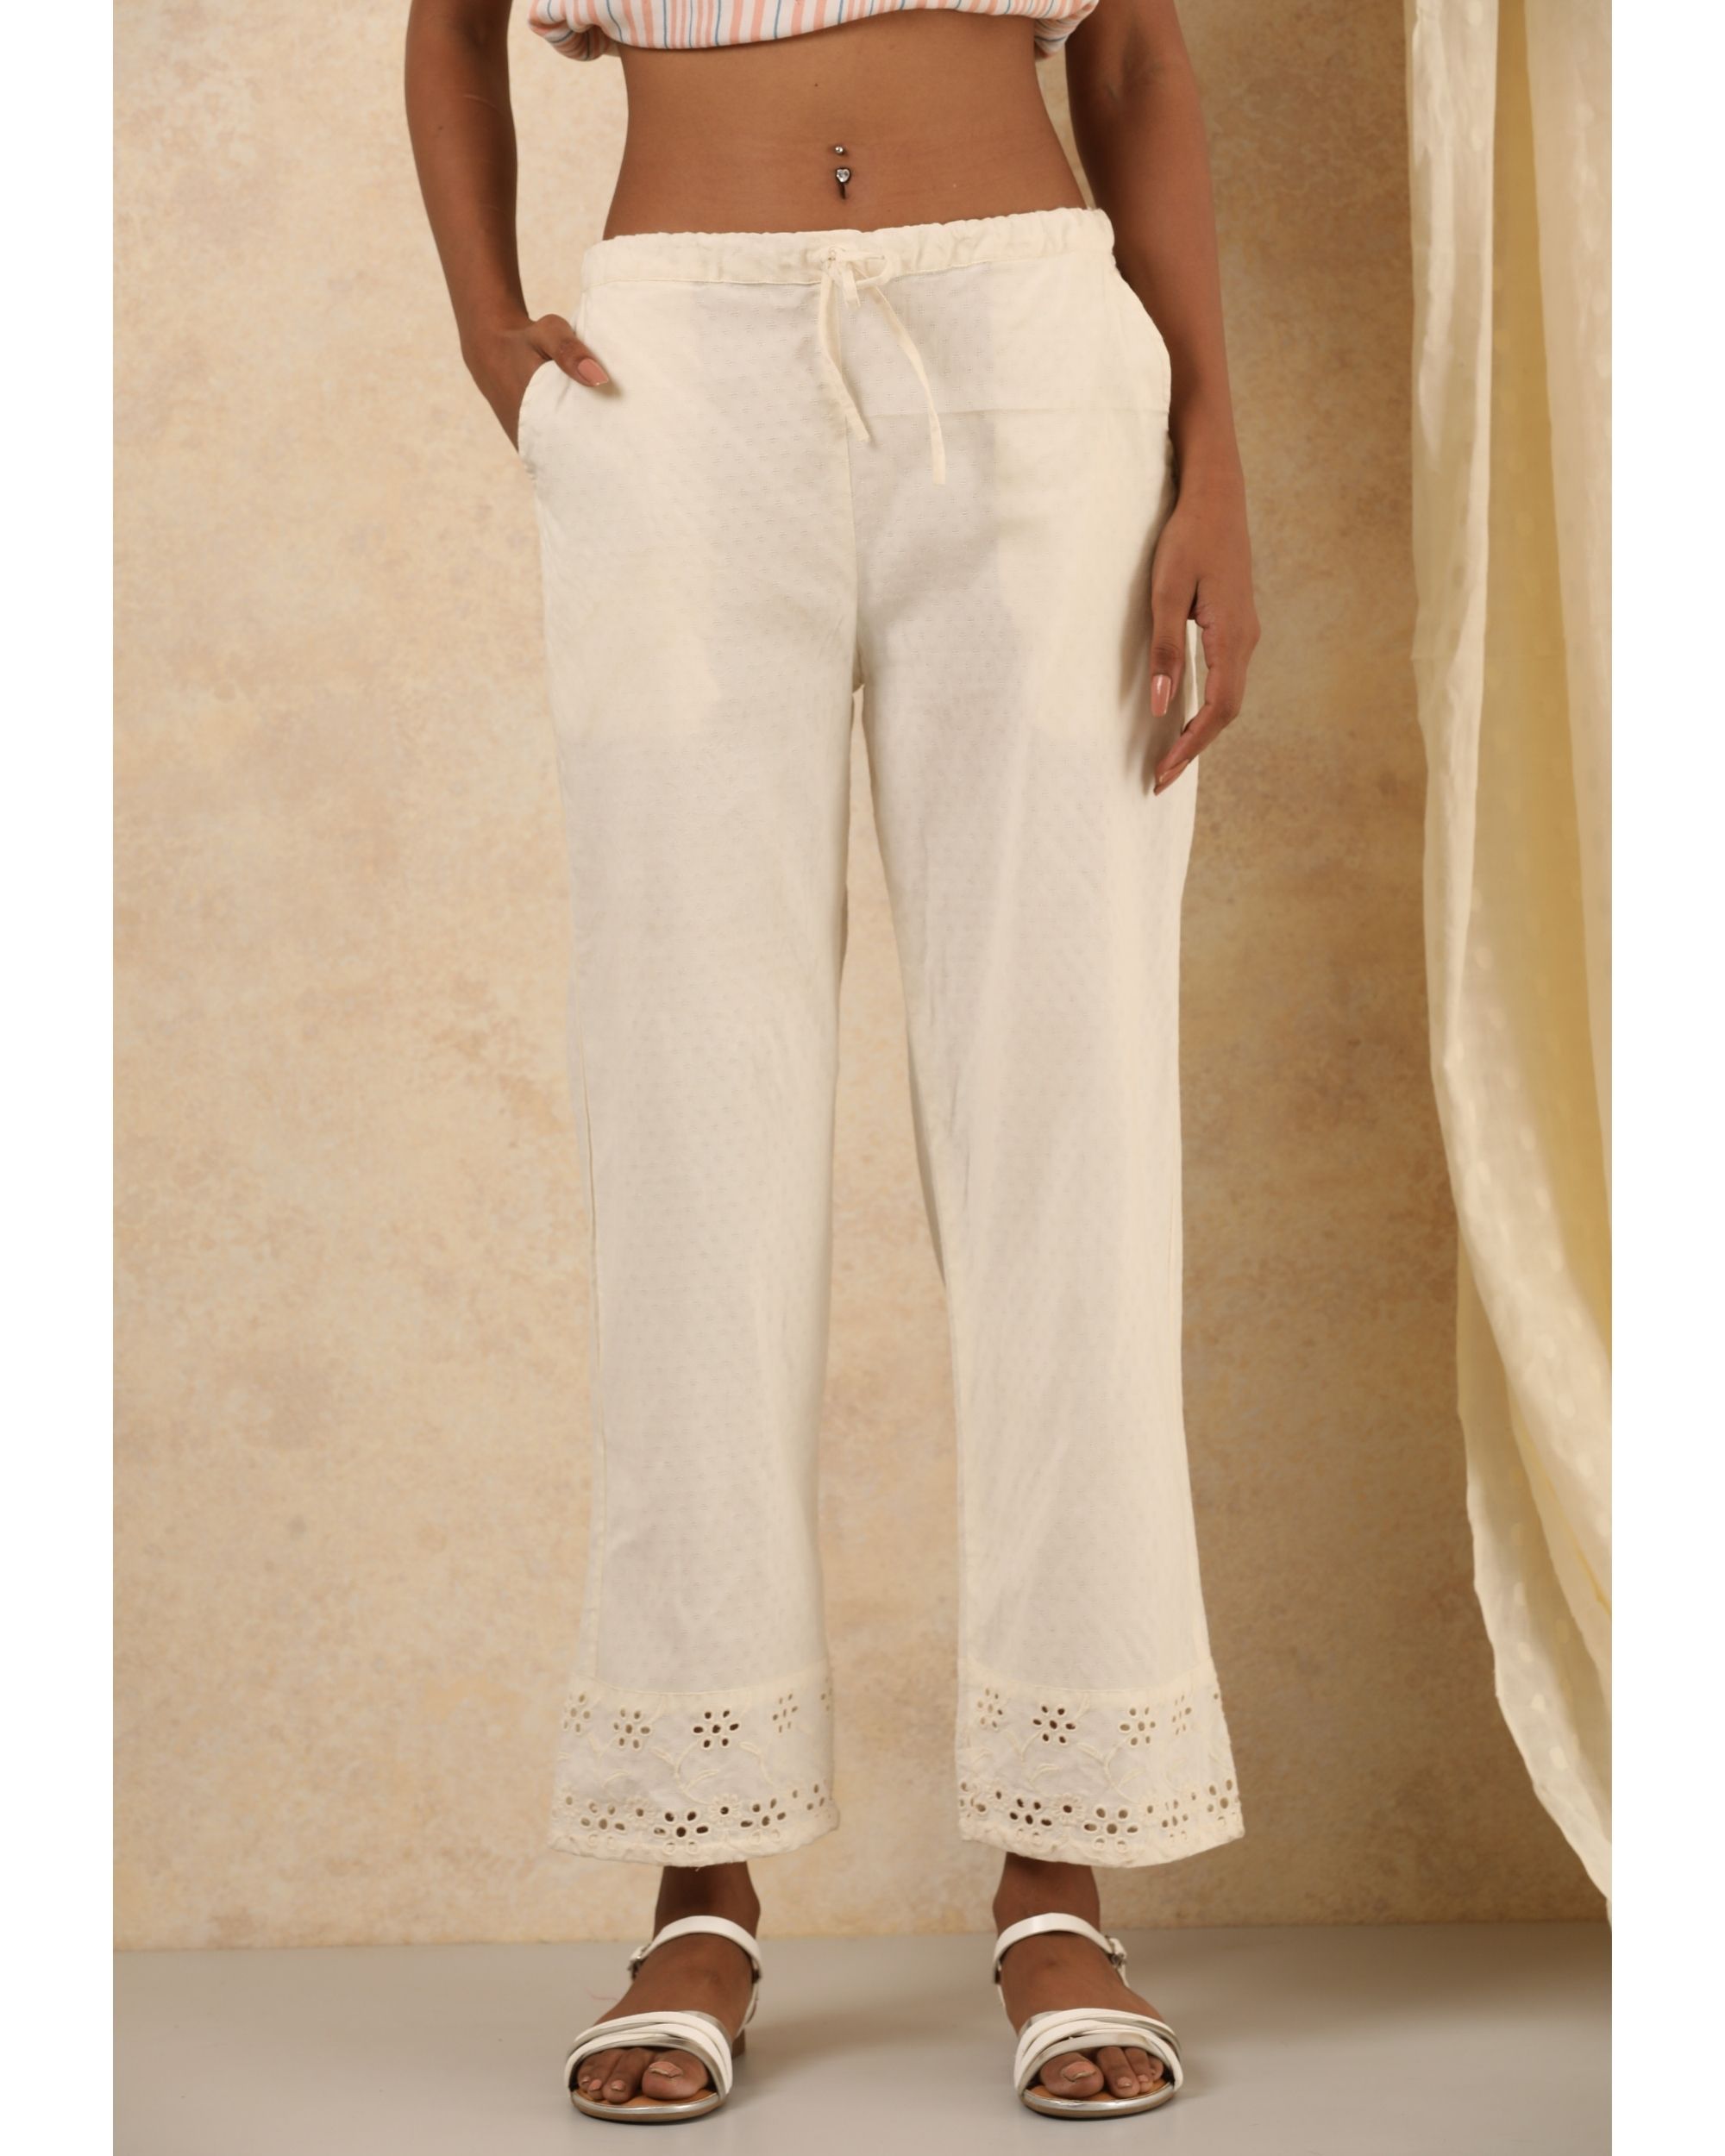 White cotton pants with embroidered detailing at hem